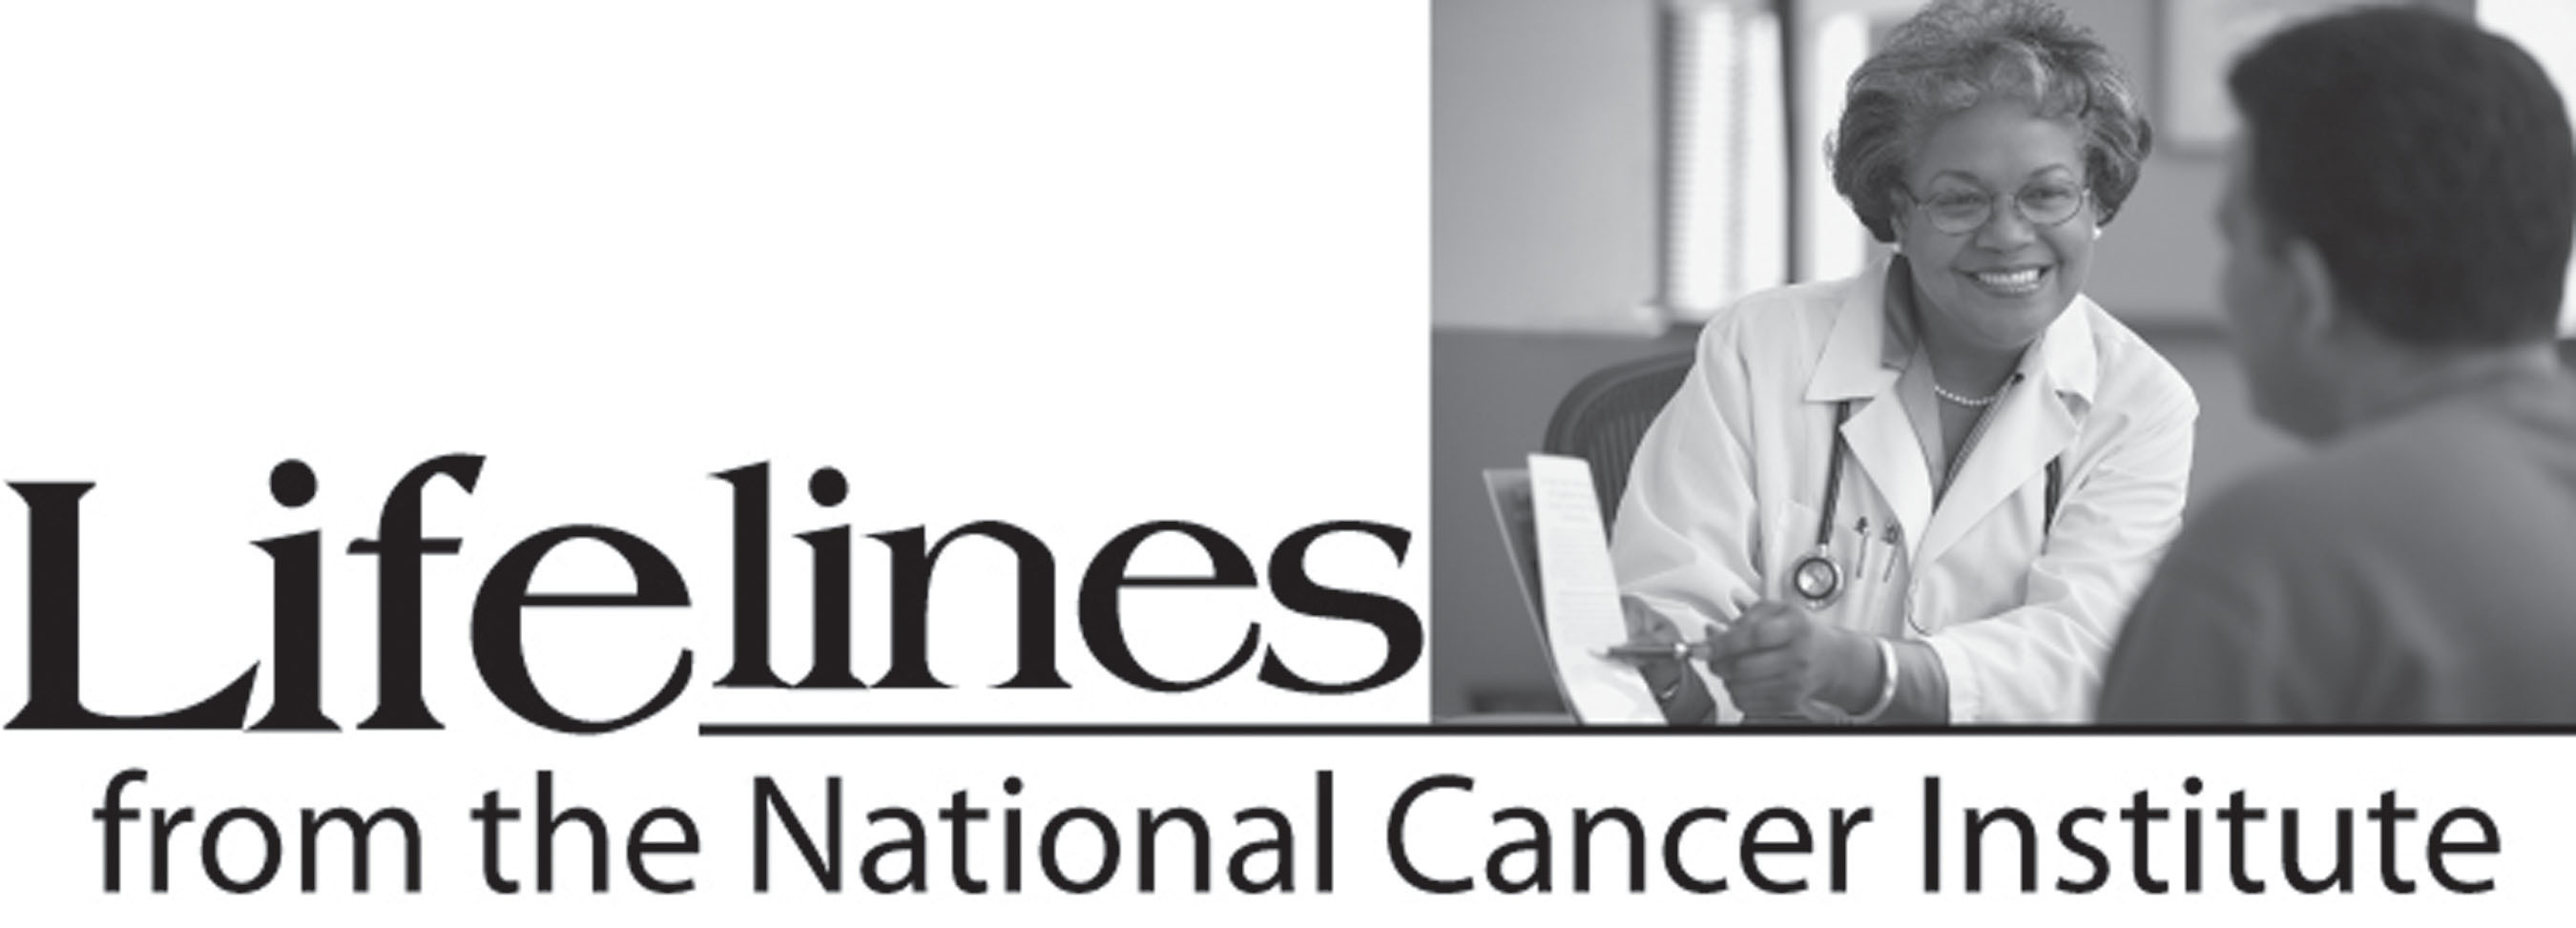 Lifelines - from the National Cancer Institute. (PRNewsFoto/National Cancer Institute) (PRNewsFoto/)